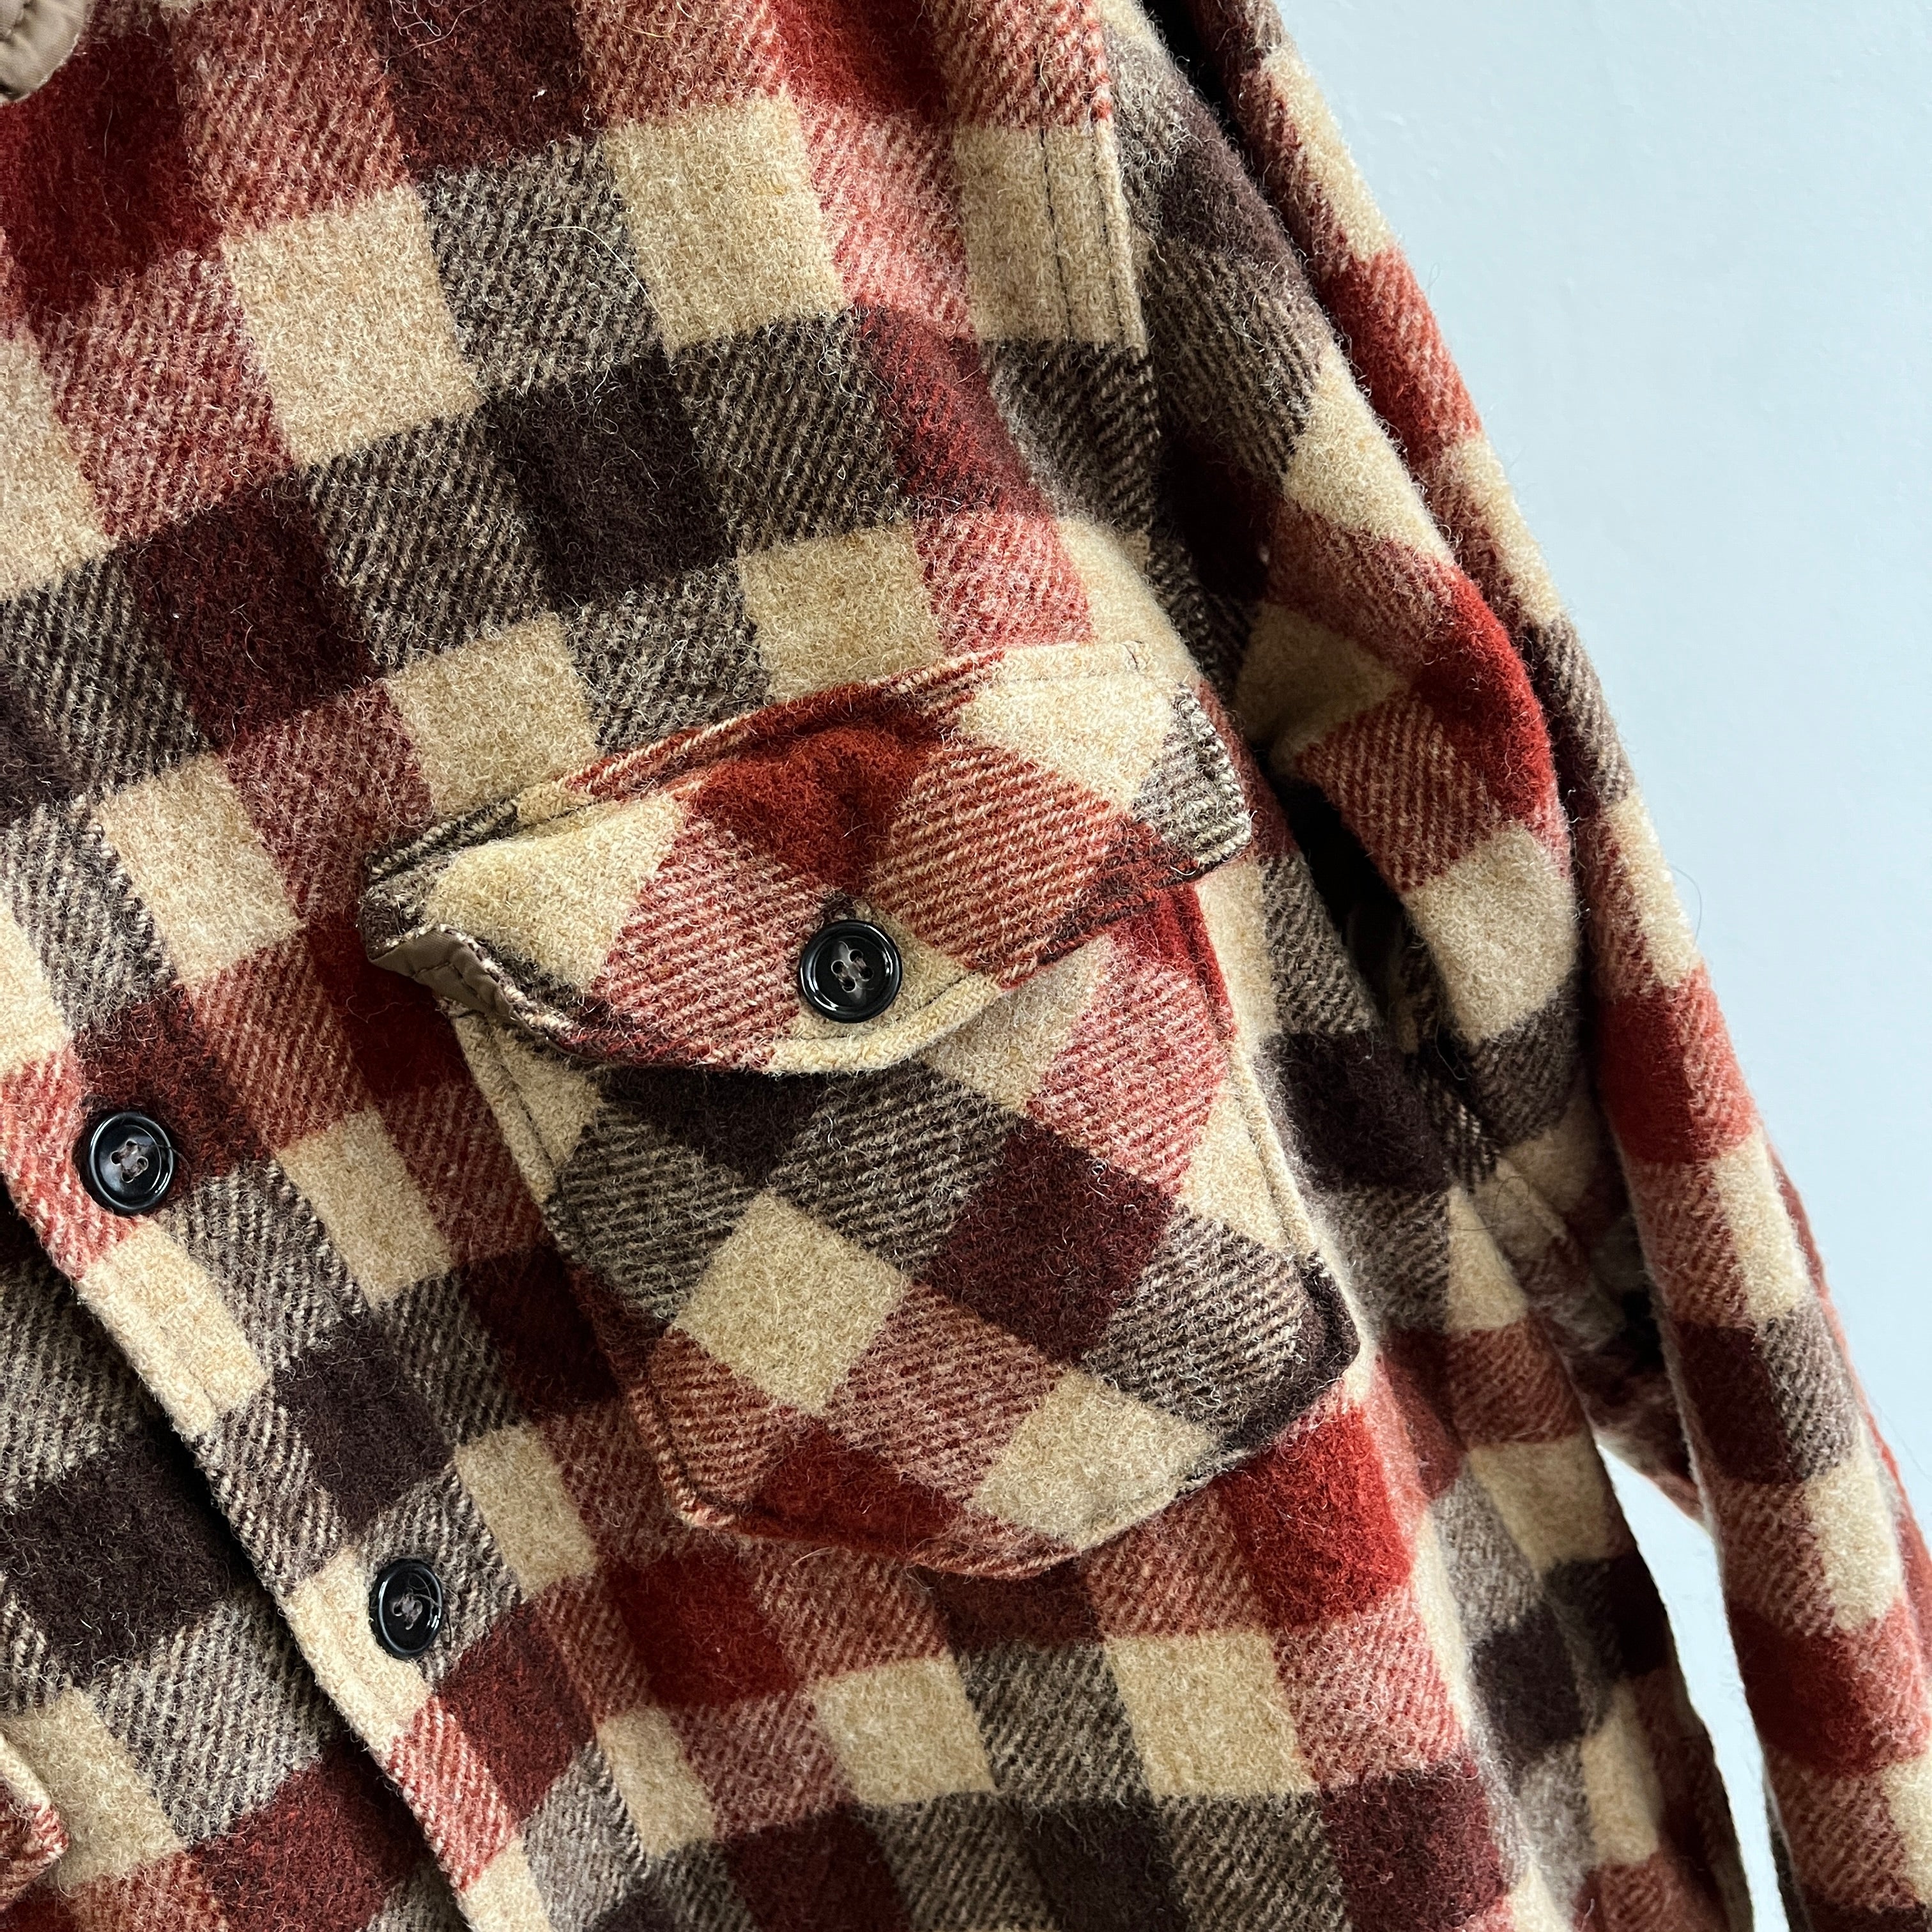 1980s Woolrich USA Made Wool Flannel